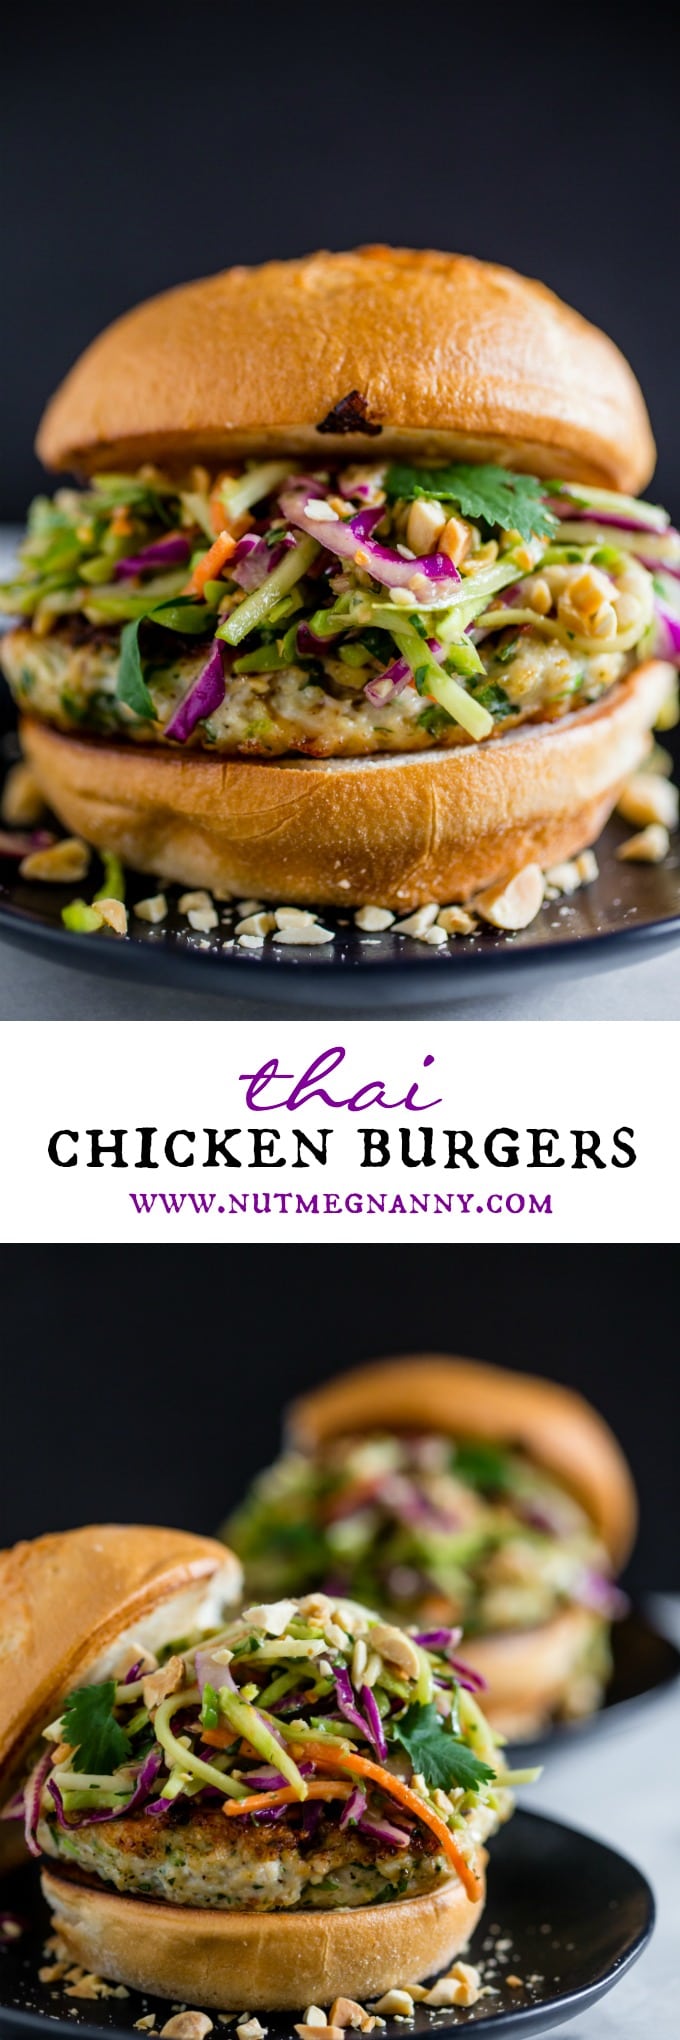 These Thai chicken burgers are packed full of fresh herbs and topped with a crunchy vegetable slaw tossed with a peanut butter dressing. Ready in about 30 minutes and LOADED with flavor!